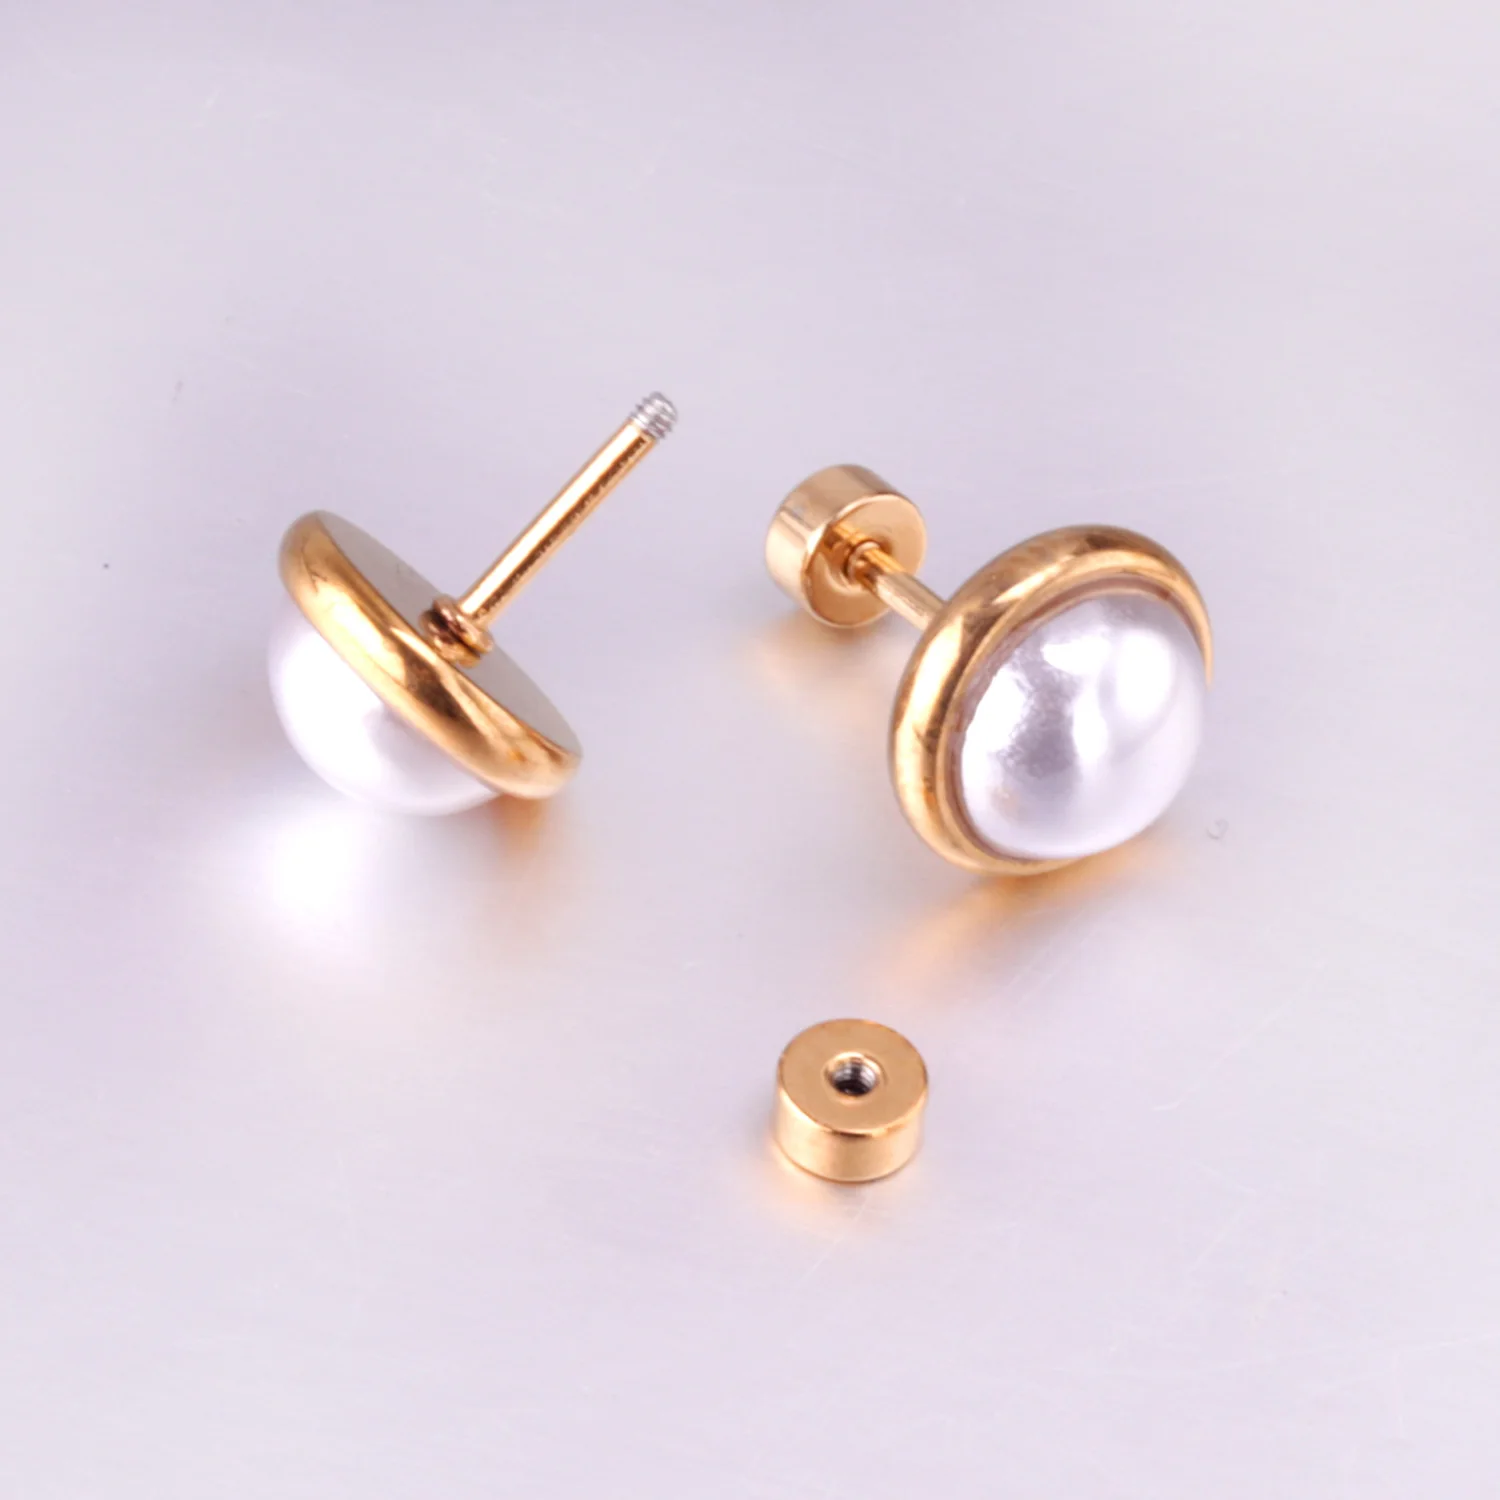 LUXUSTEEL Vintage Imitation Pearl Stud Earrings For Women Gold Color Stainless Steel Korean Jewelry Gifts 4/6/8/10mm